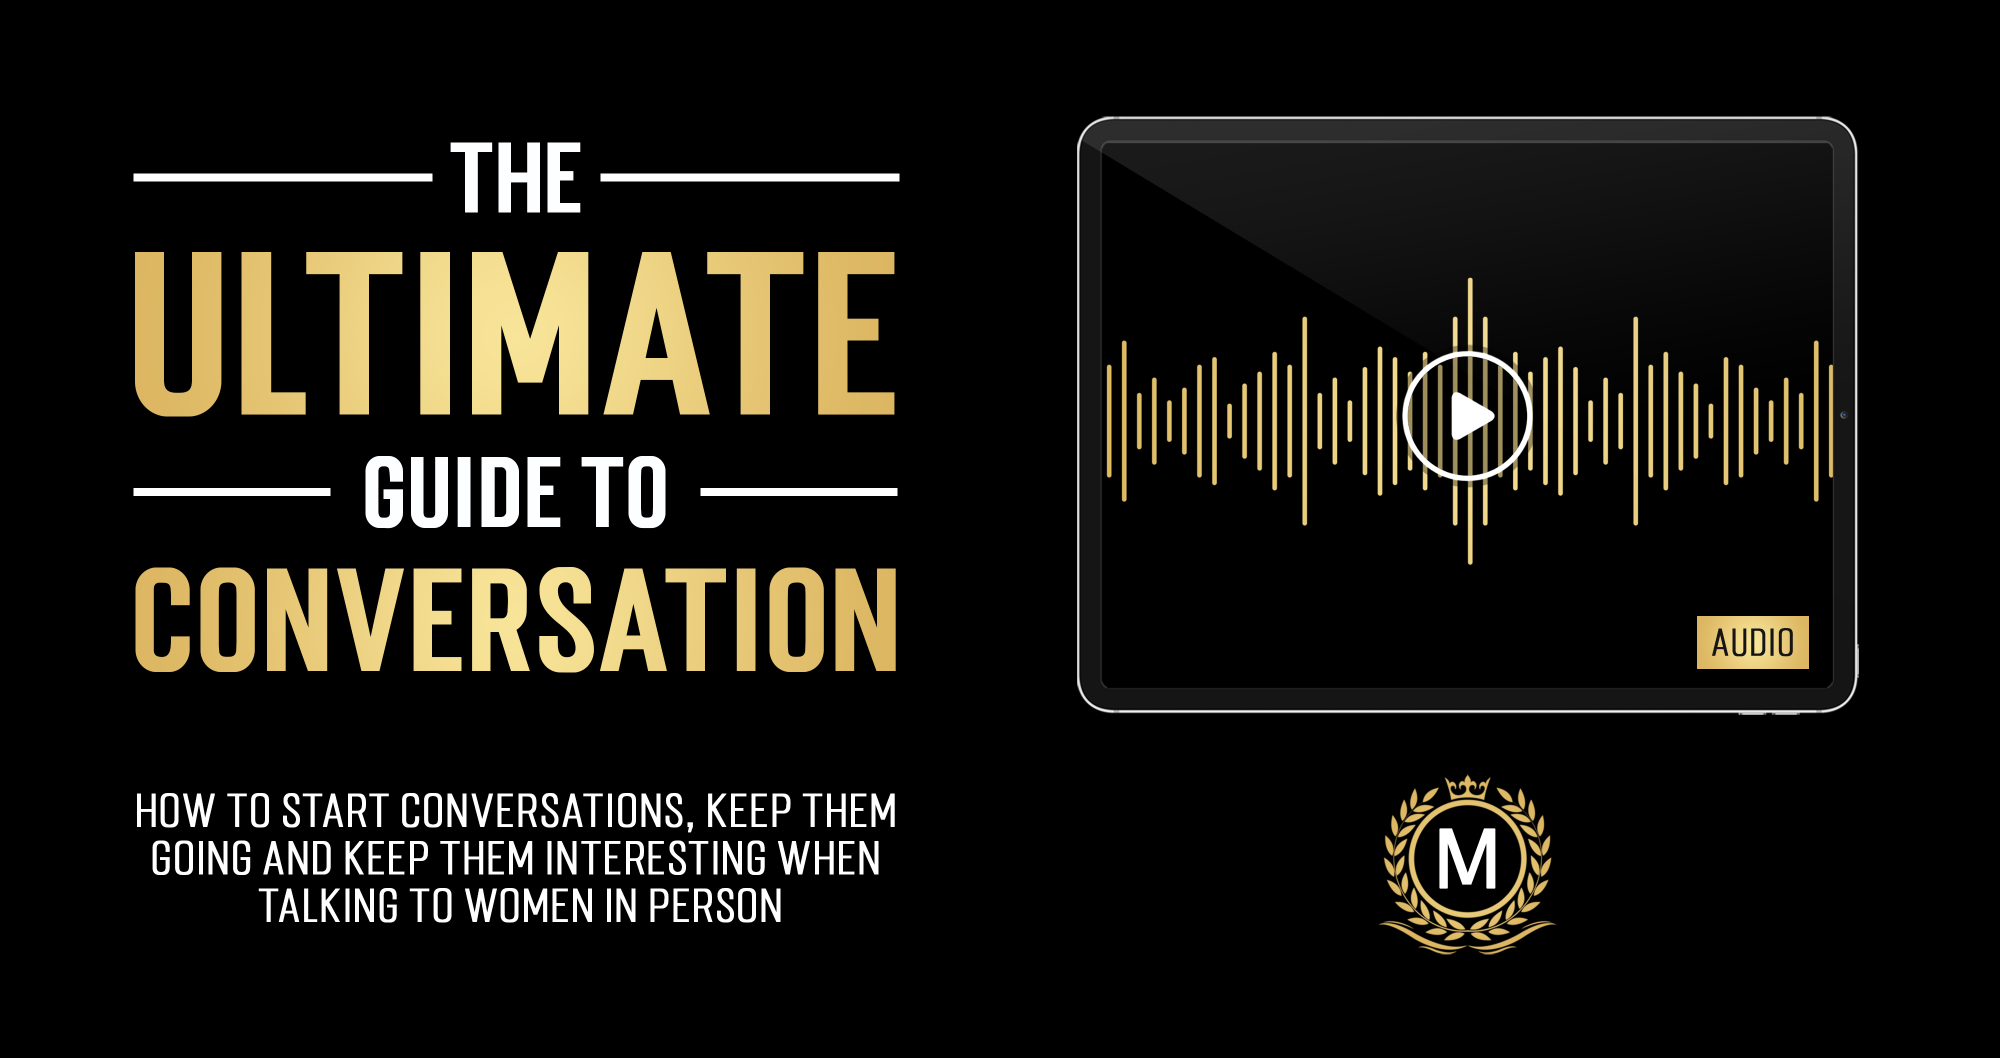 The Ultimate Guide to Conversation by The Modern Man